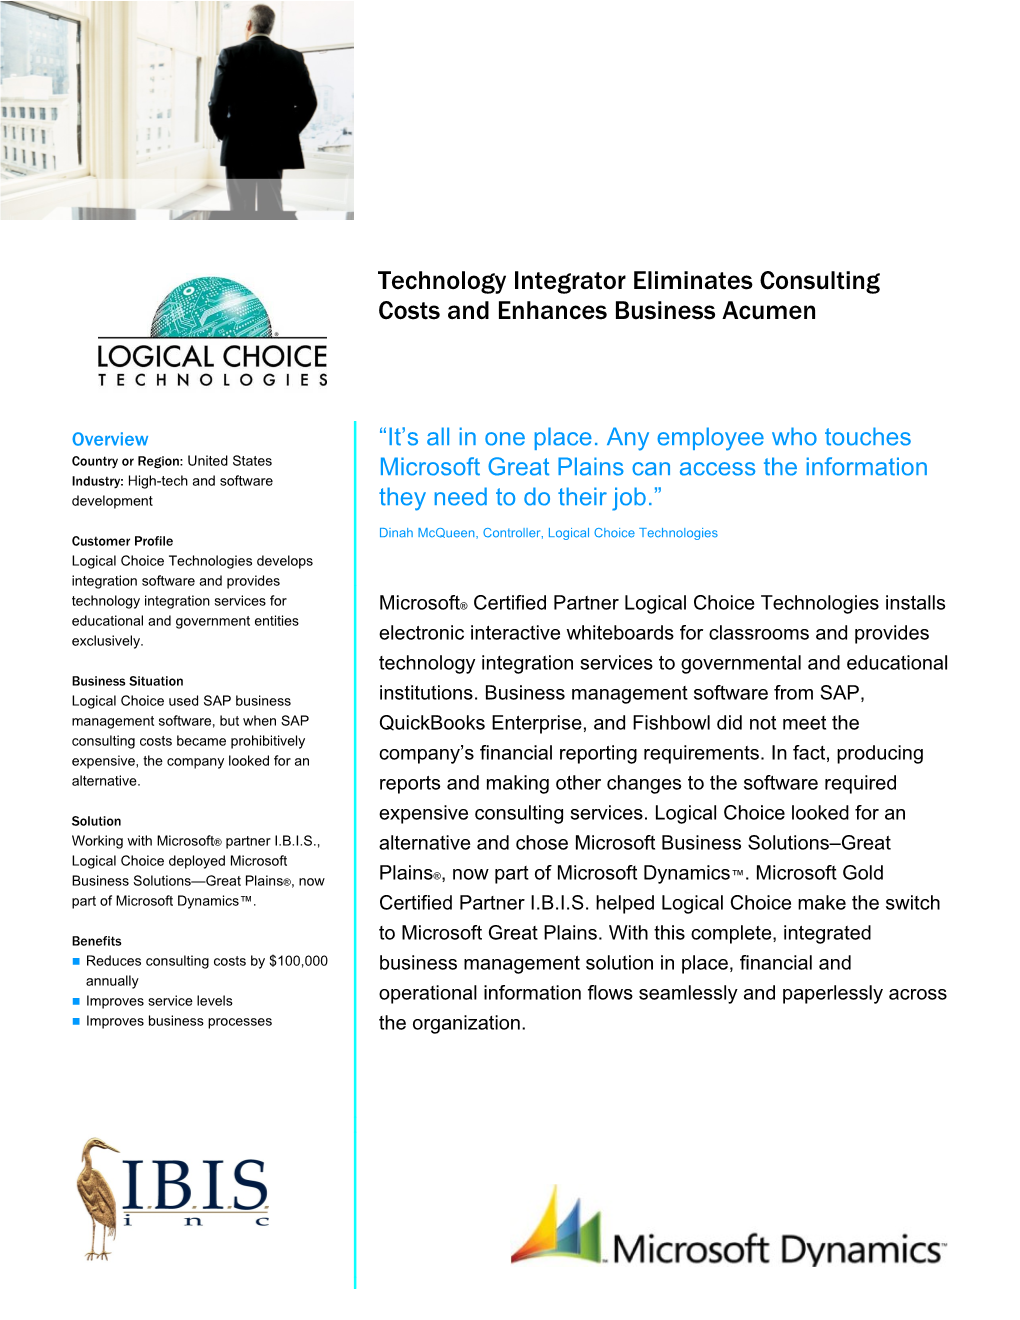 Technology Integrator Eliminates Consulting Costs and Enhances Business Acumen